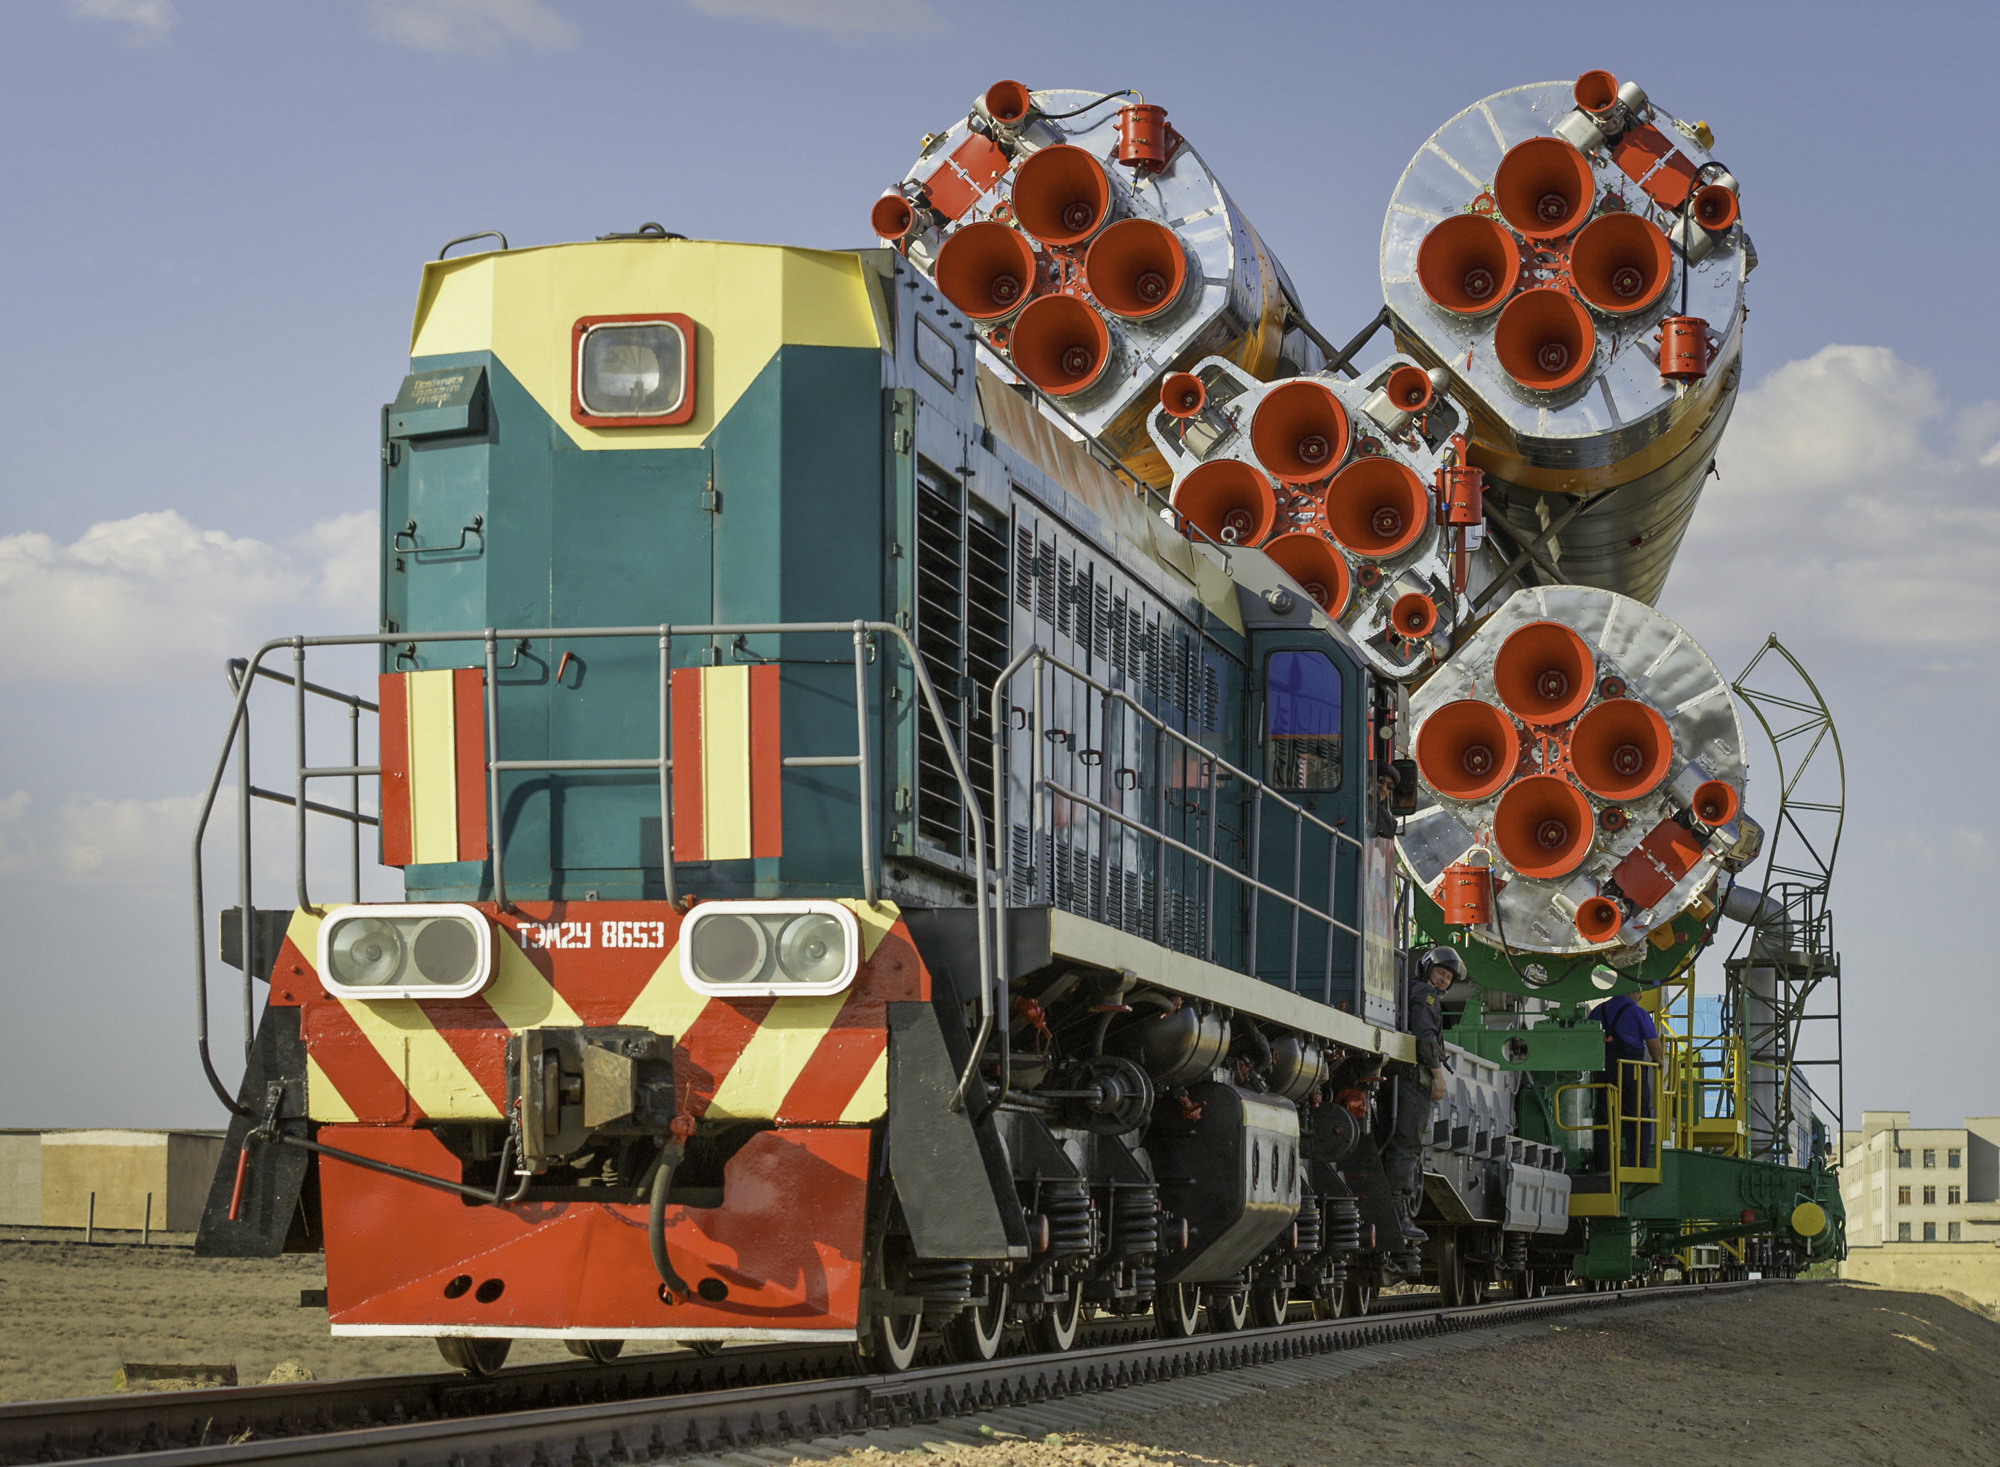  The Soyuz TMA-02M spacecraft is carried by train on its way to the launch pad at the Baikonur Cosmodrome, Kazakhstan, Sunday, June 5, 2011. The launch of the Soyuz spacecraft with Expedition 28 Soyuz Commander Sergei Volkov of Russia, NASA Flight En